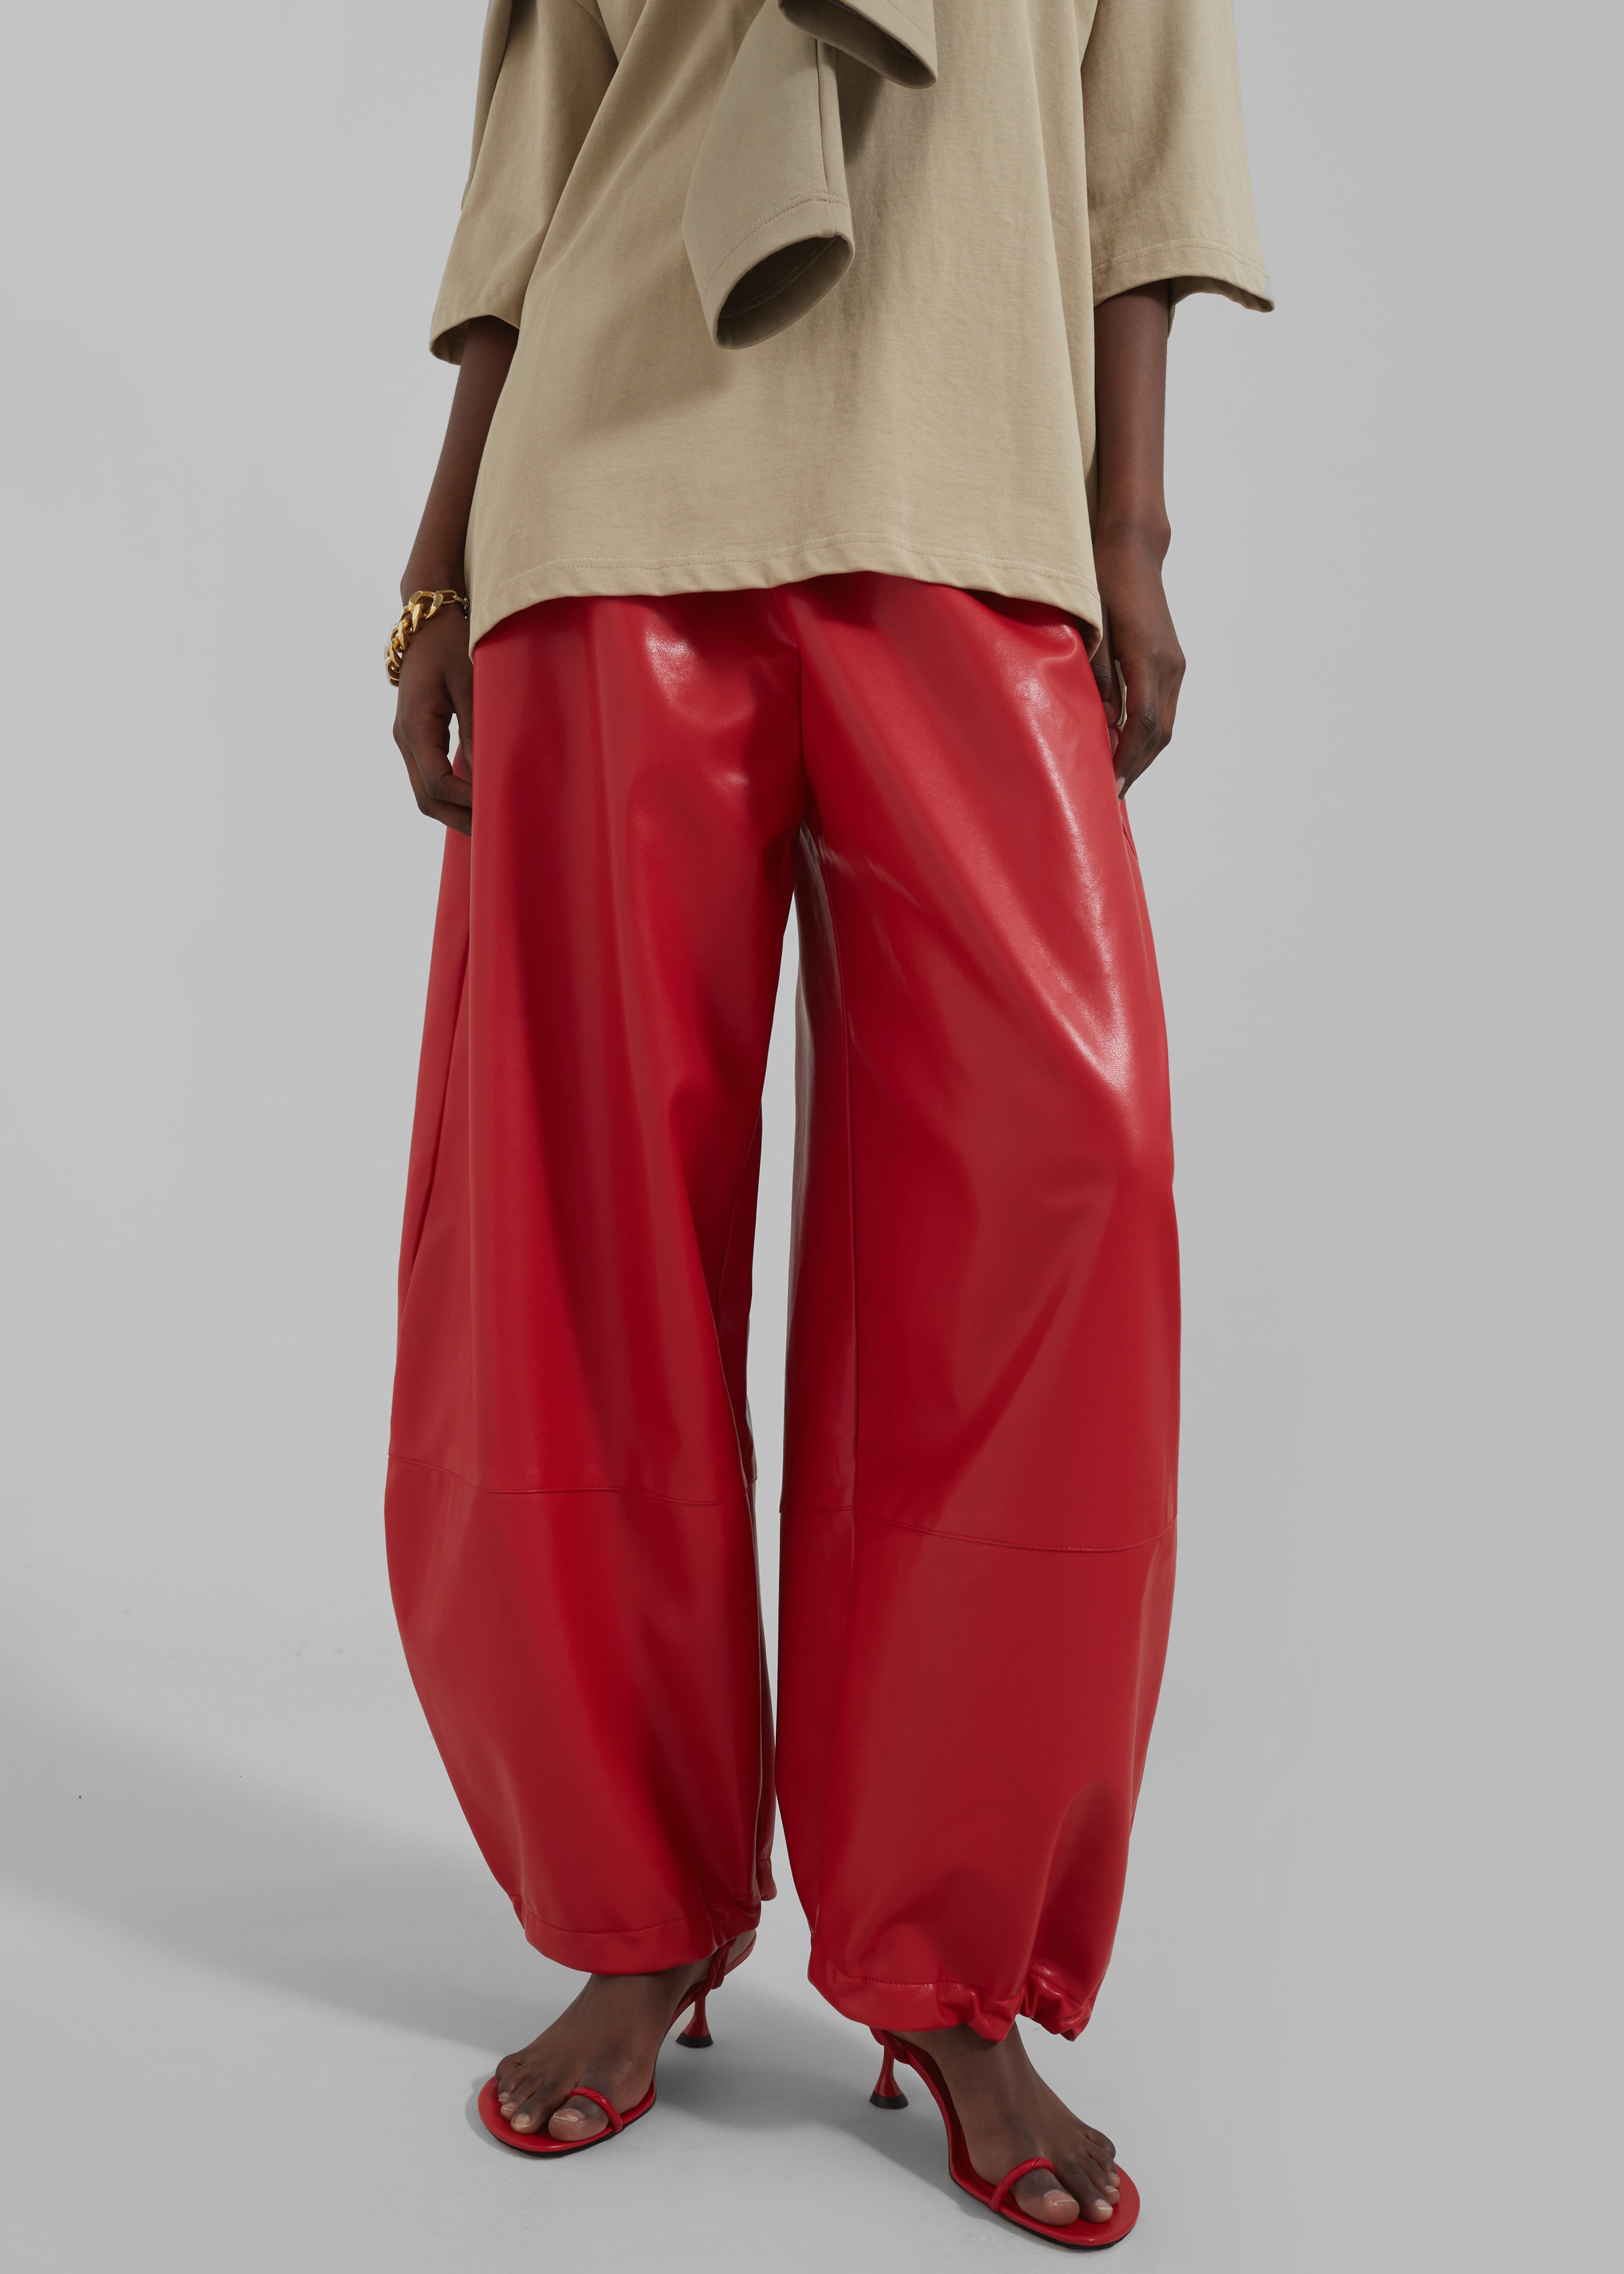 Briar Faux Leather Balloon Pants - Red - 4